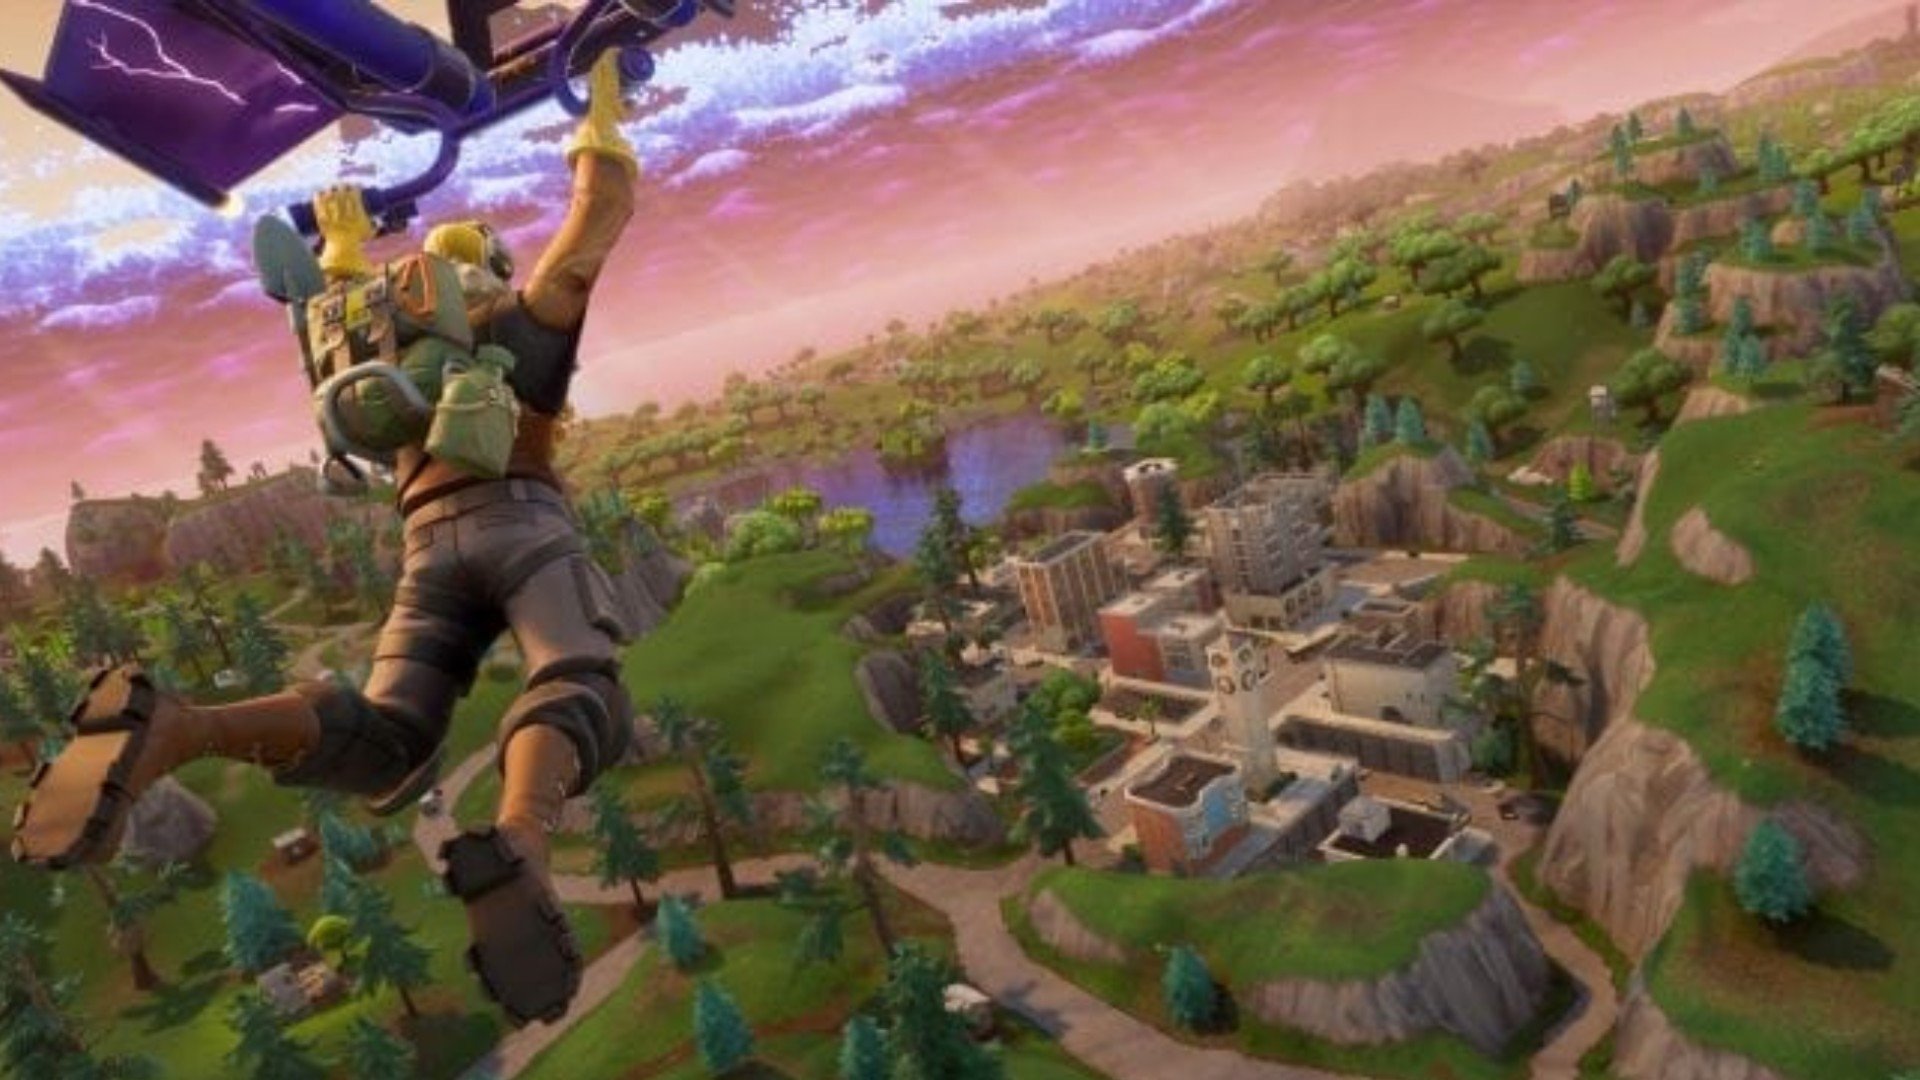 Fortnite Screenshot showing a character using a paraglider to head towards a nearby settlement. 